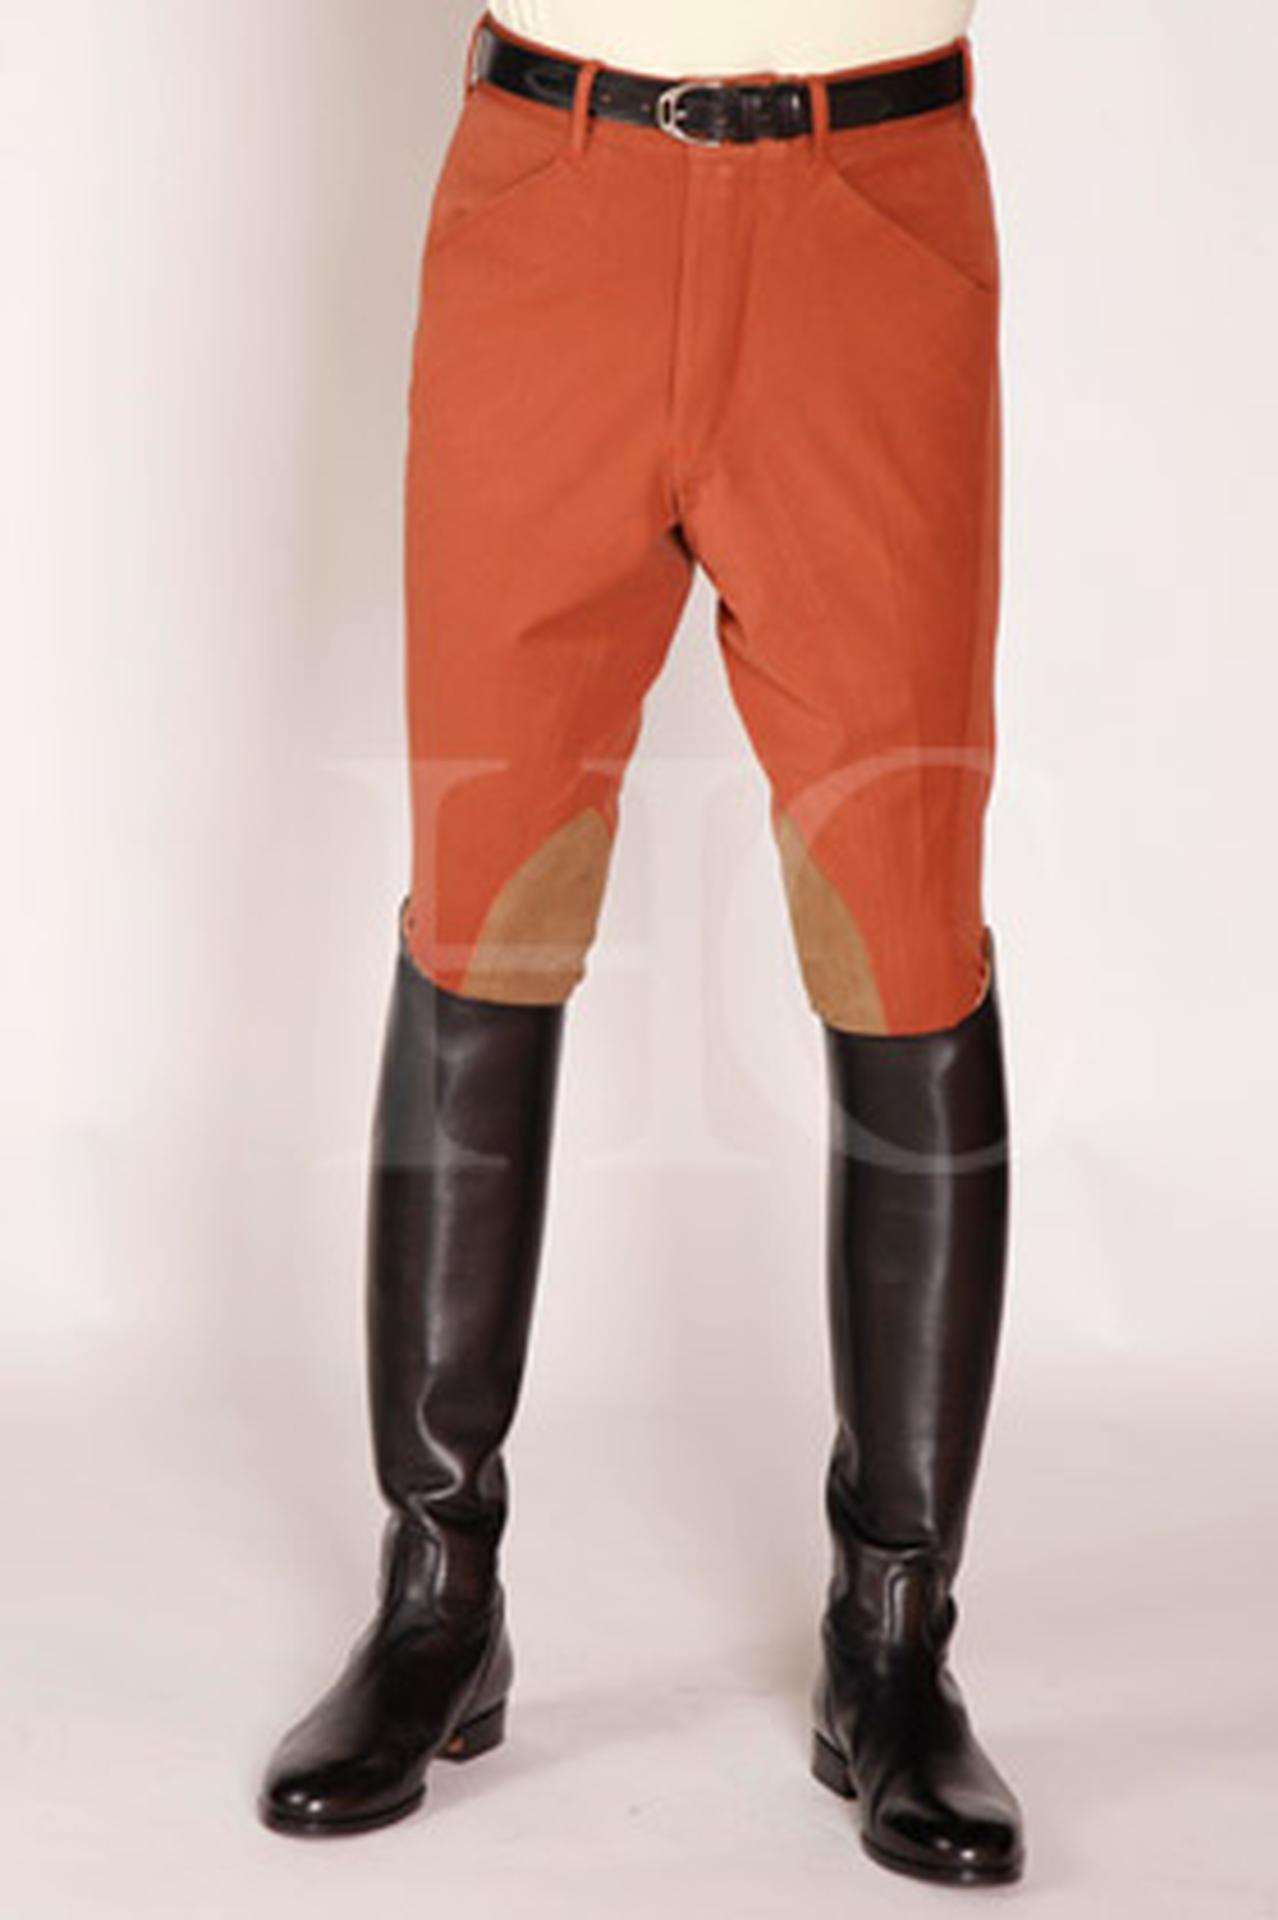 Need riding breeches? You will find men's breeches here! - Horseonline.com